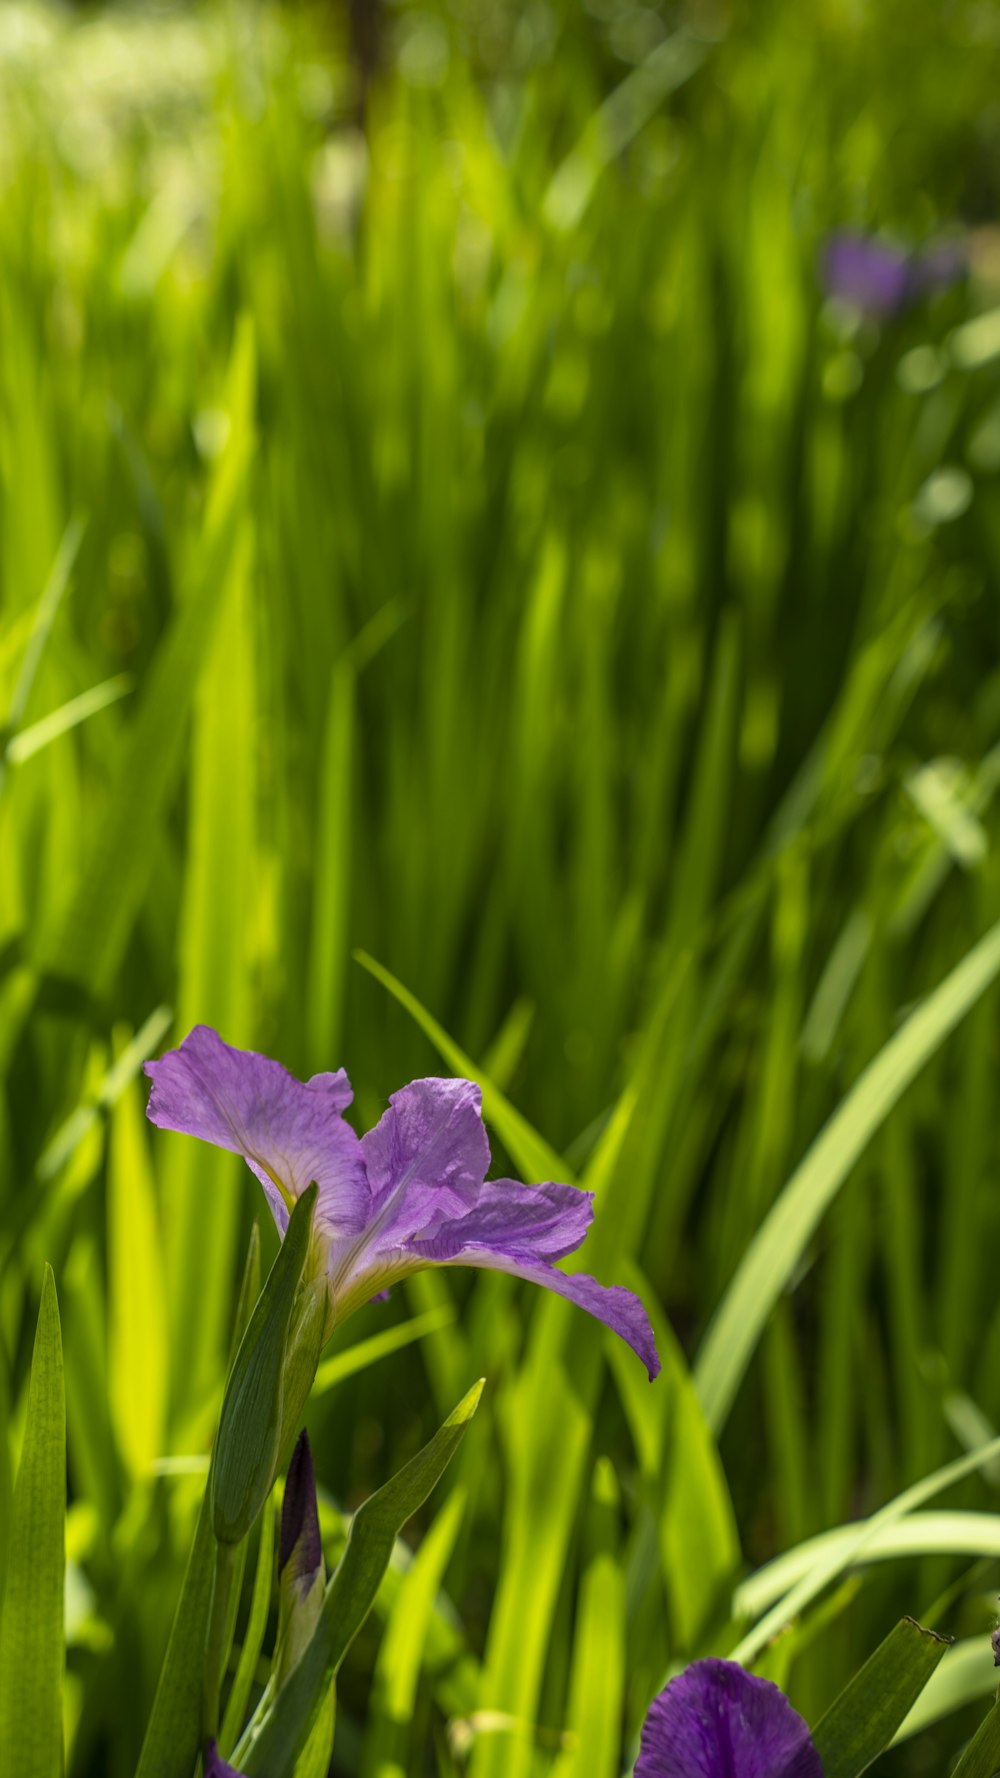 a close up of a purple flower in a field of grass